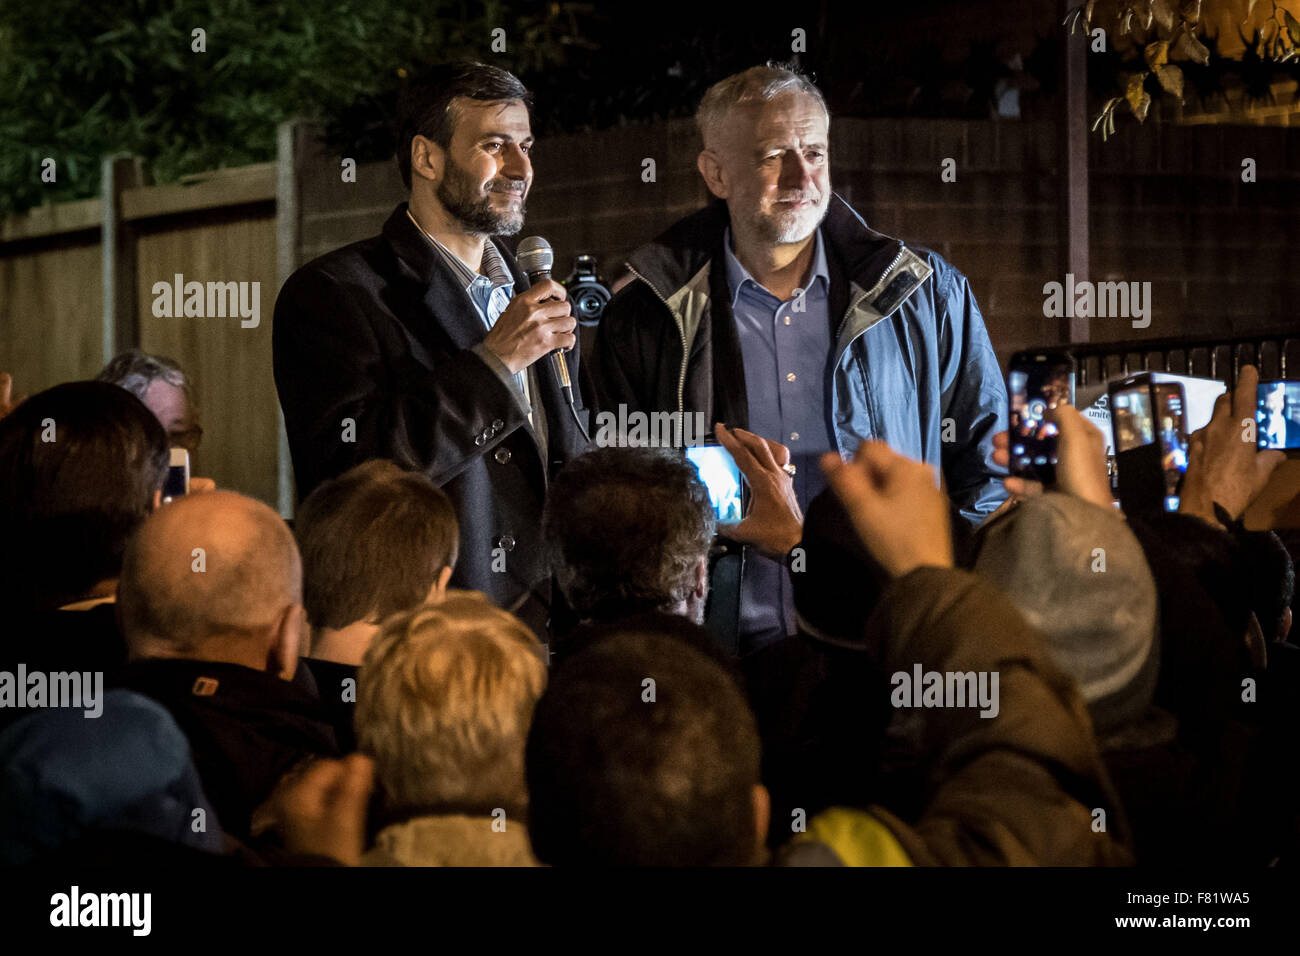 London, UK. 4th December, 2015. Labour party leader Jeremy Corbyn speaks outside Finsbury Park Mosque in North London at an anti-racist rally against the recent fire attack on the Mosque Credit:  Guy Corbishley/Alamy Live News Stock Photo